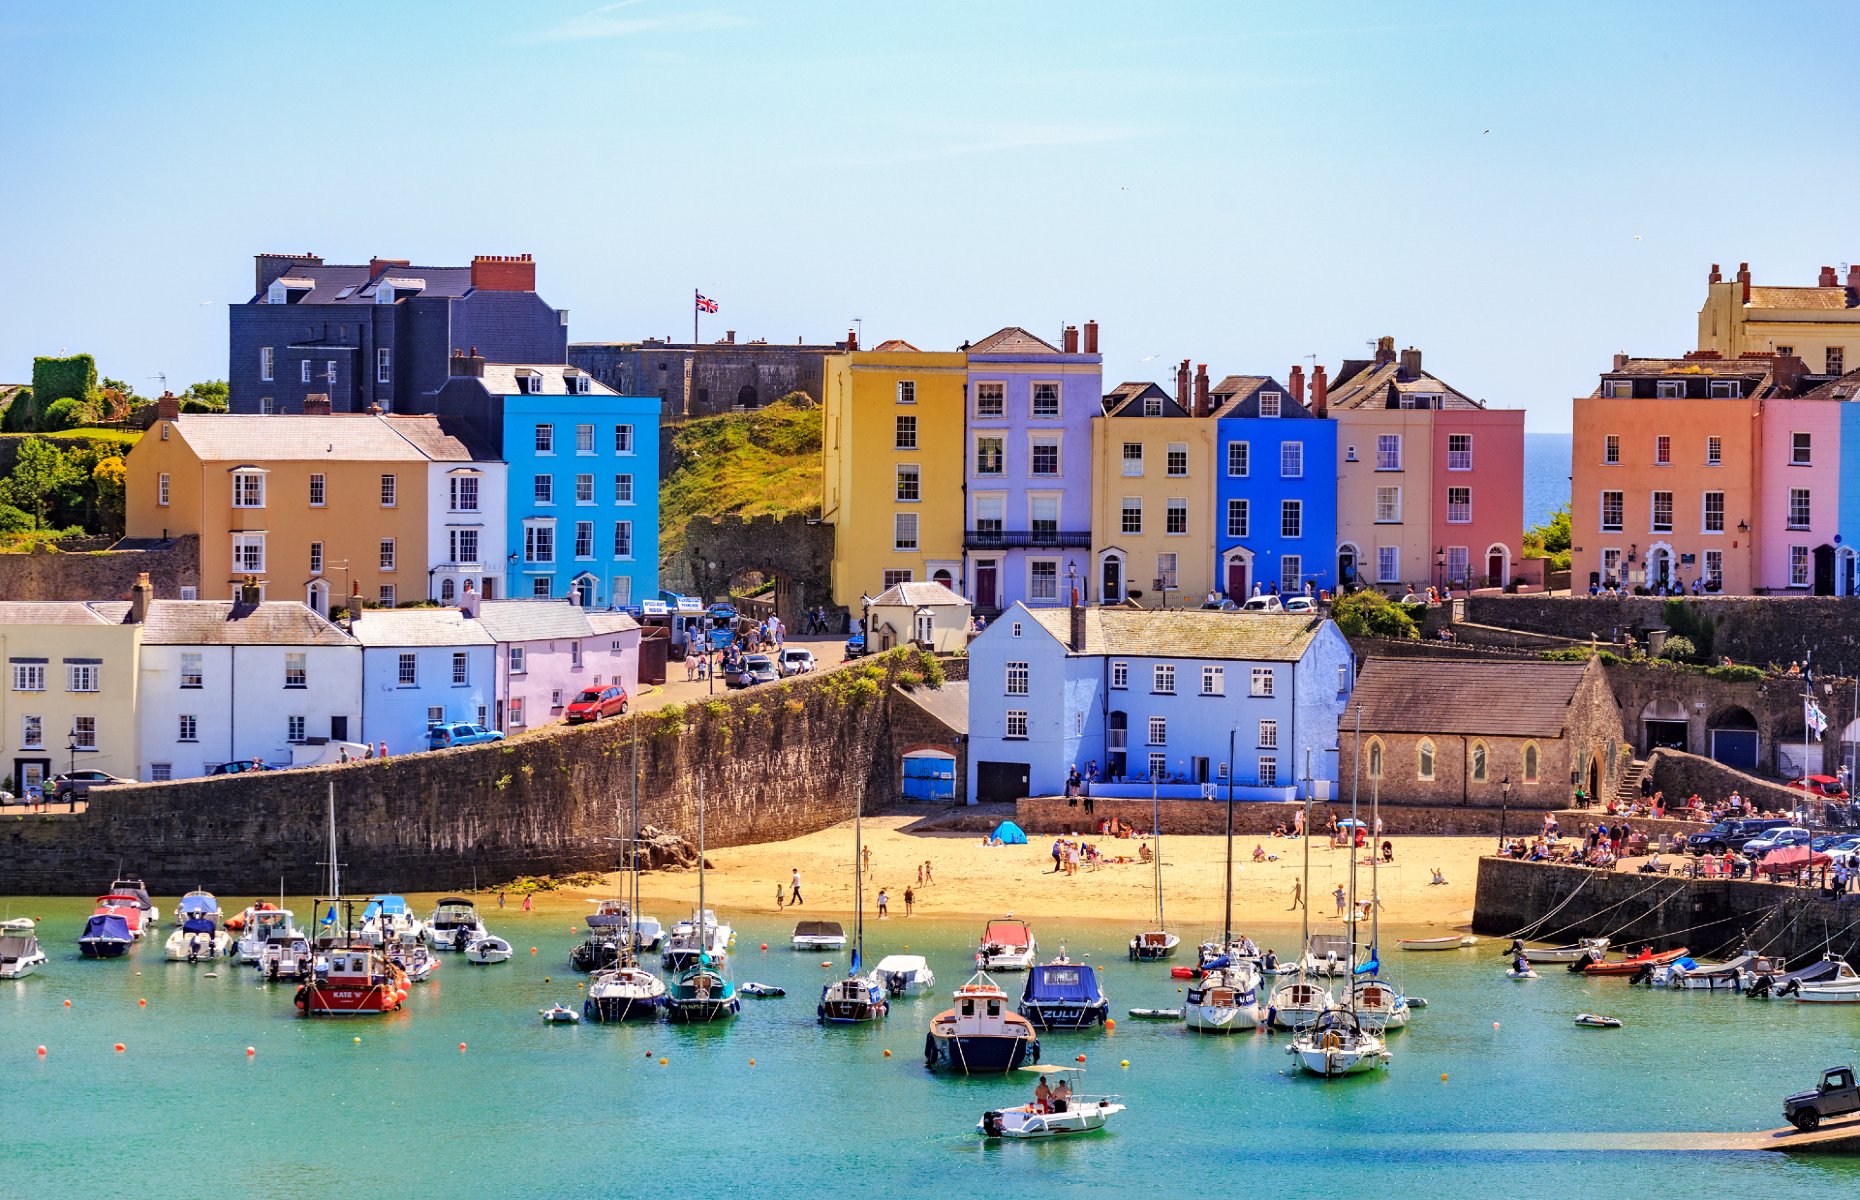 Tenby harbour with colourful houses (Image: Lukasz Pajor/Shutterstock)